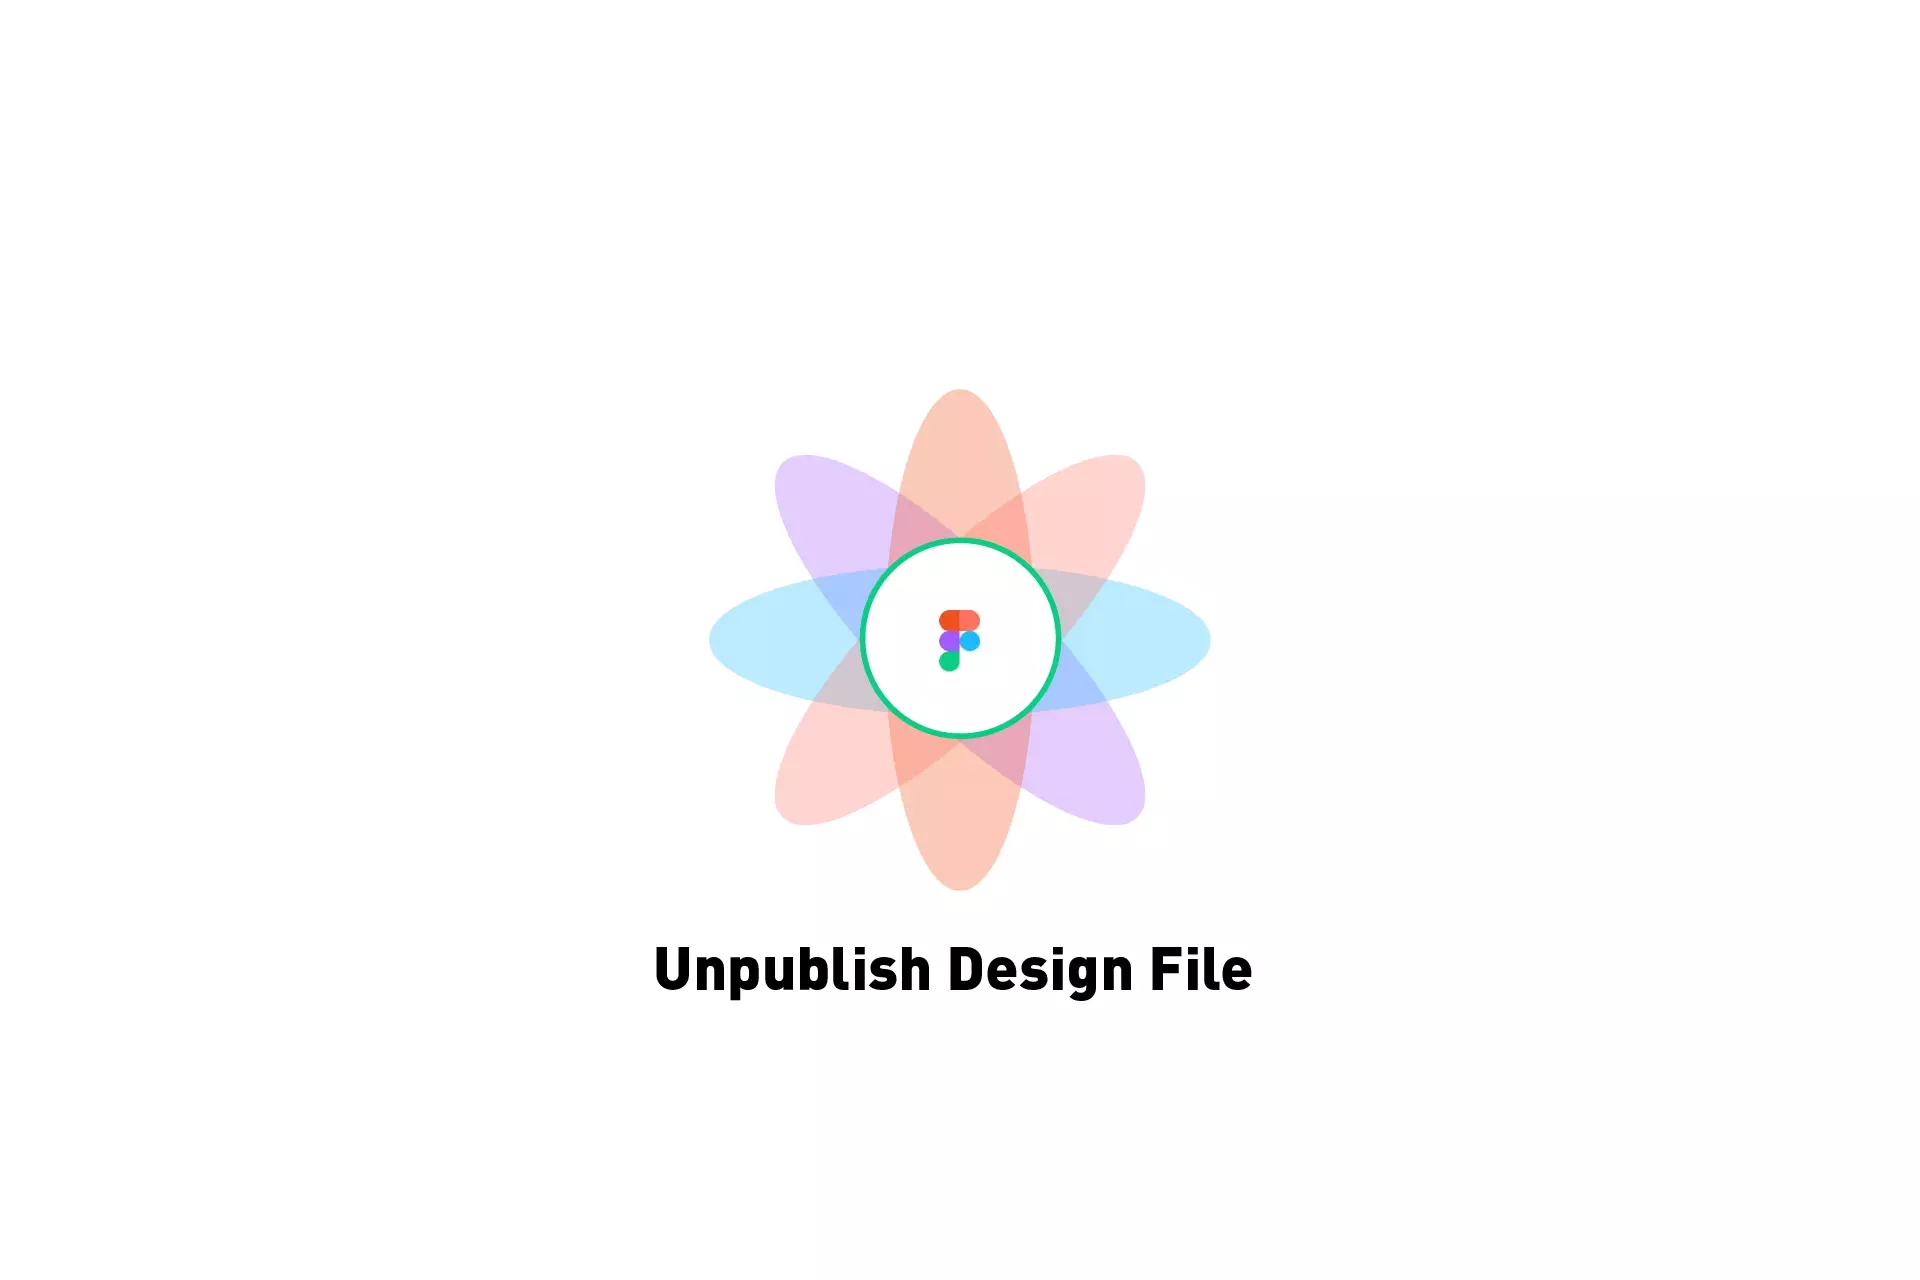 A flower that represents Figma with the text "Unpublished Design File" beneath it.